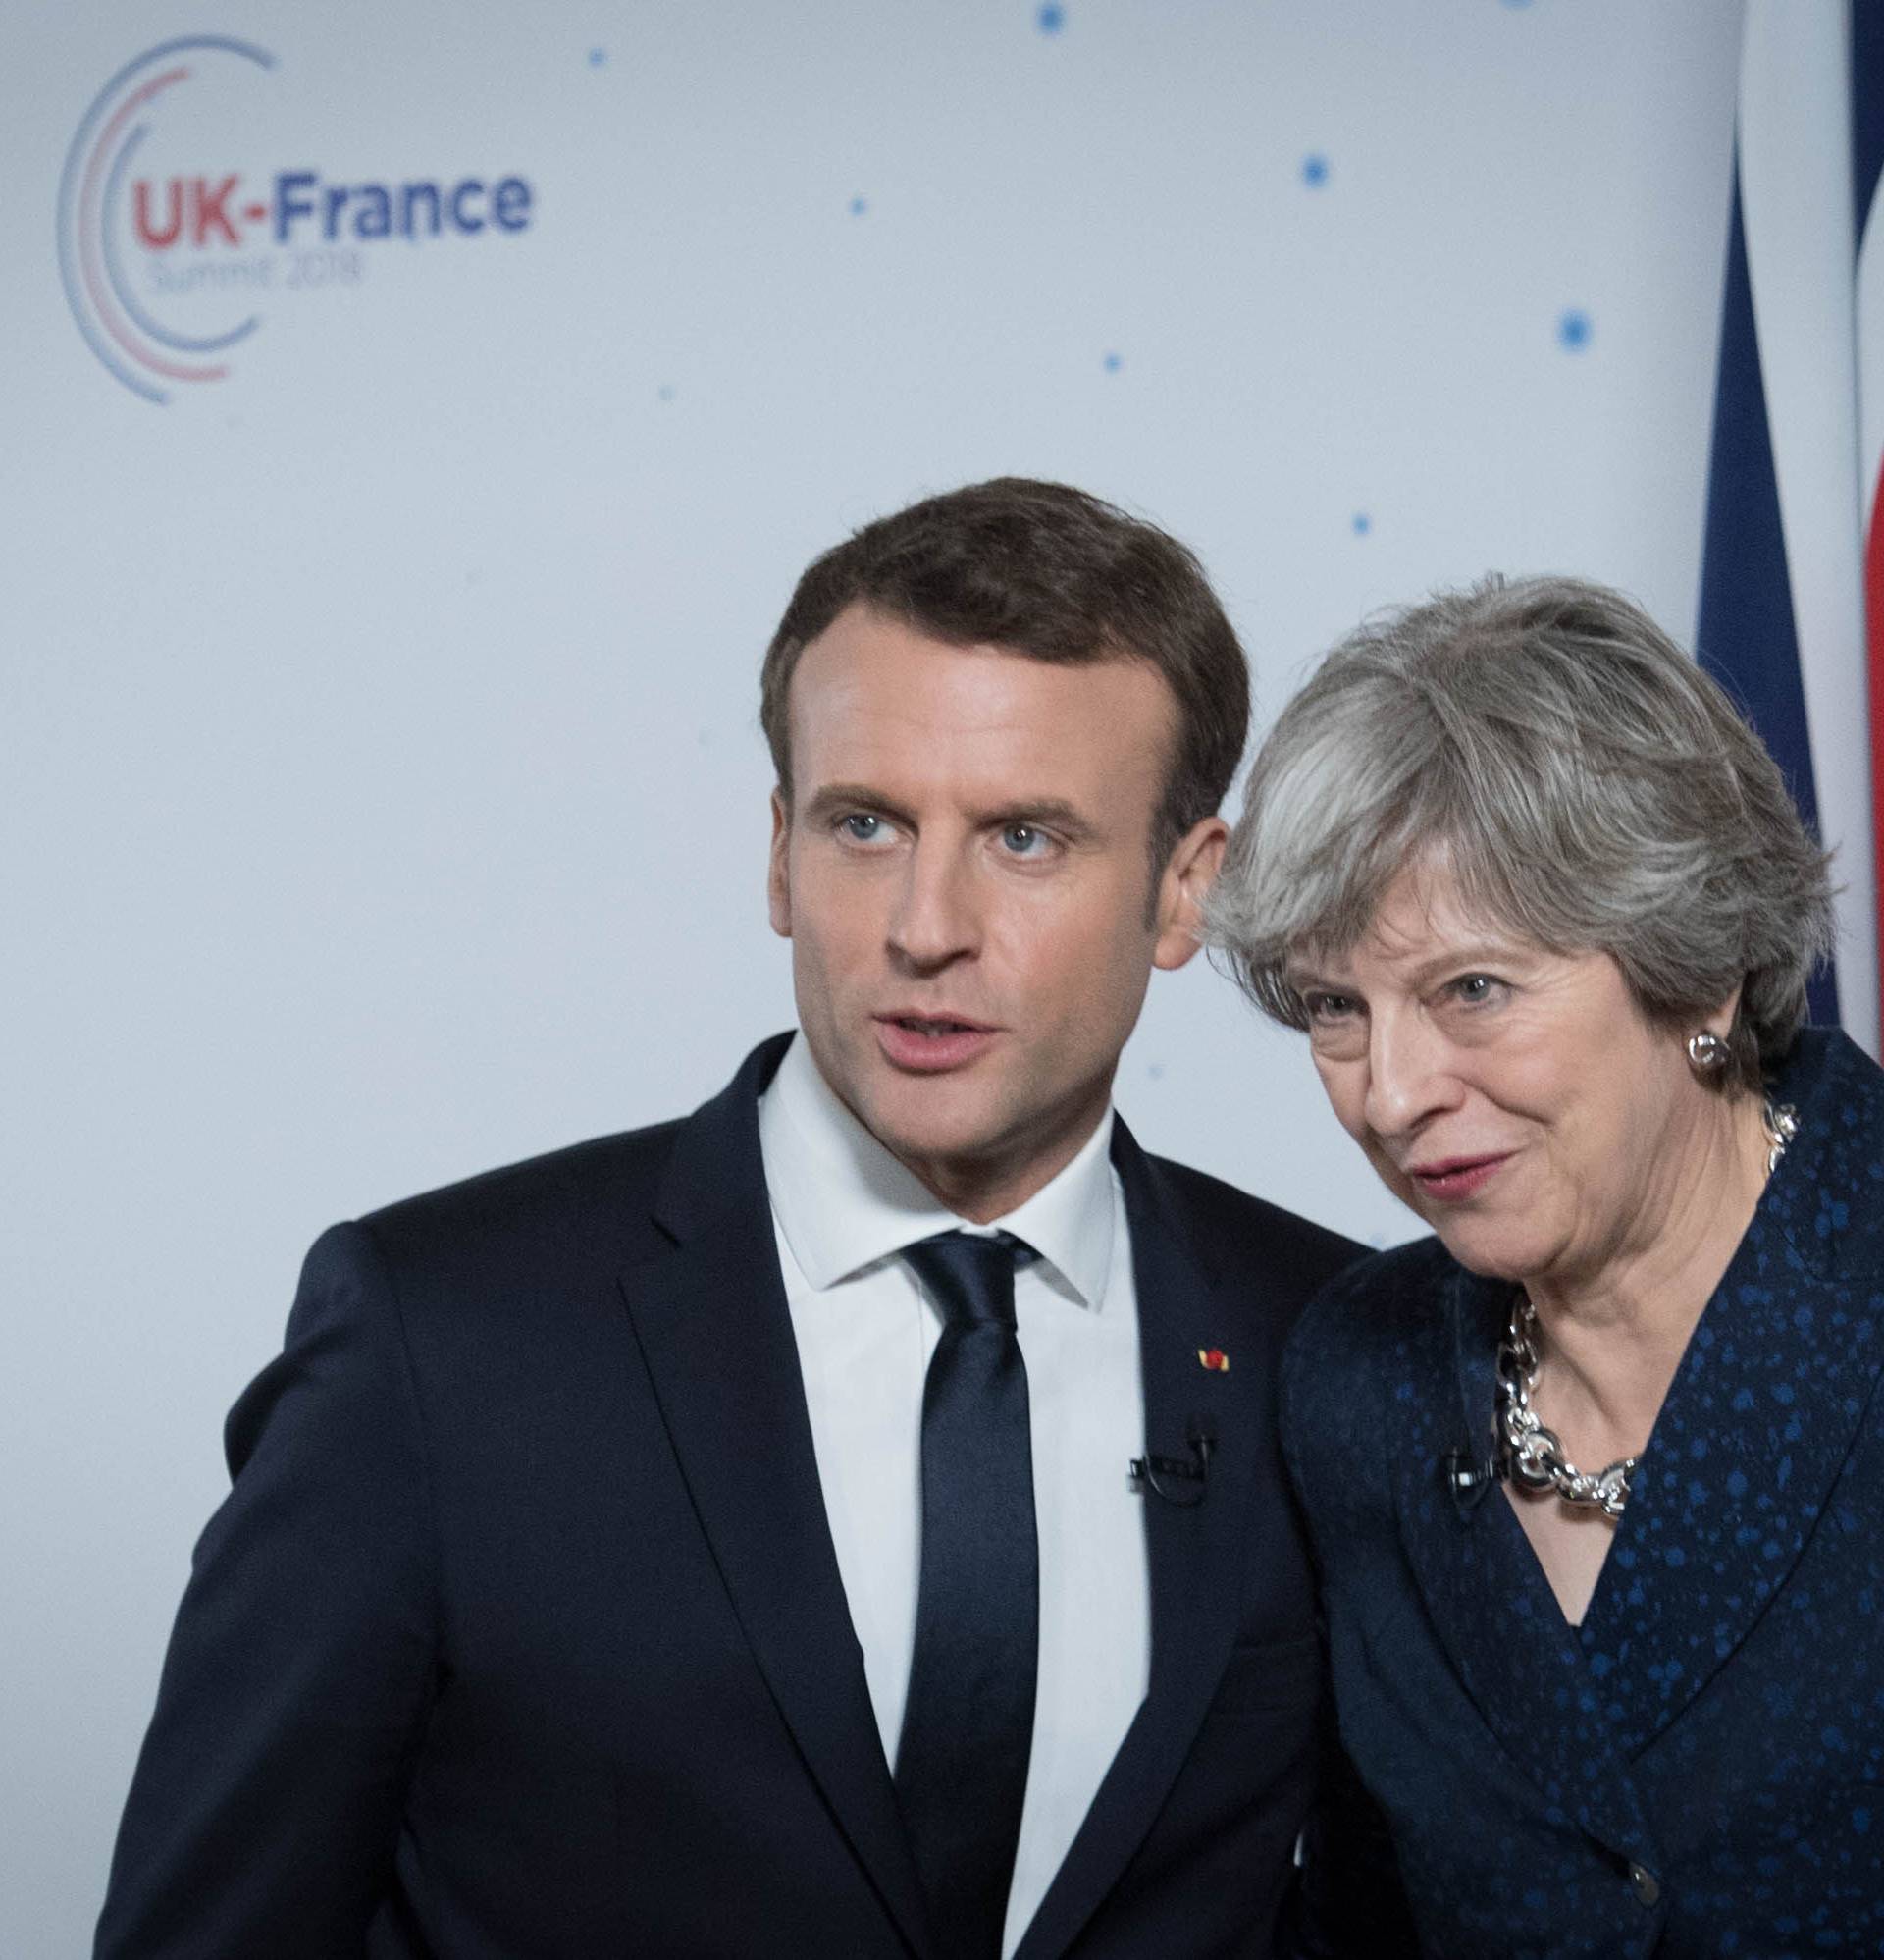 Britain and France summit